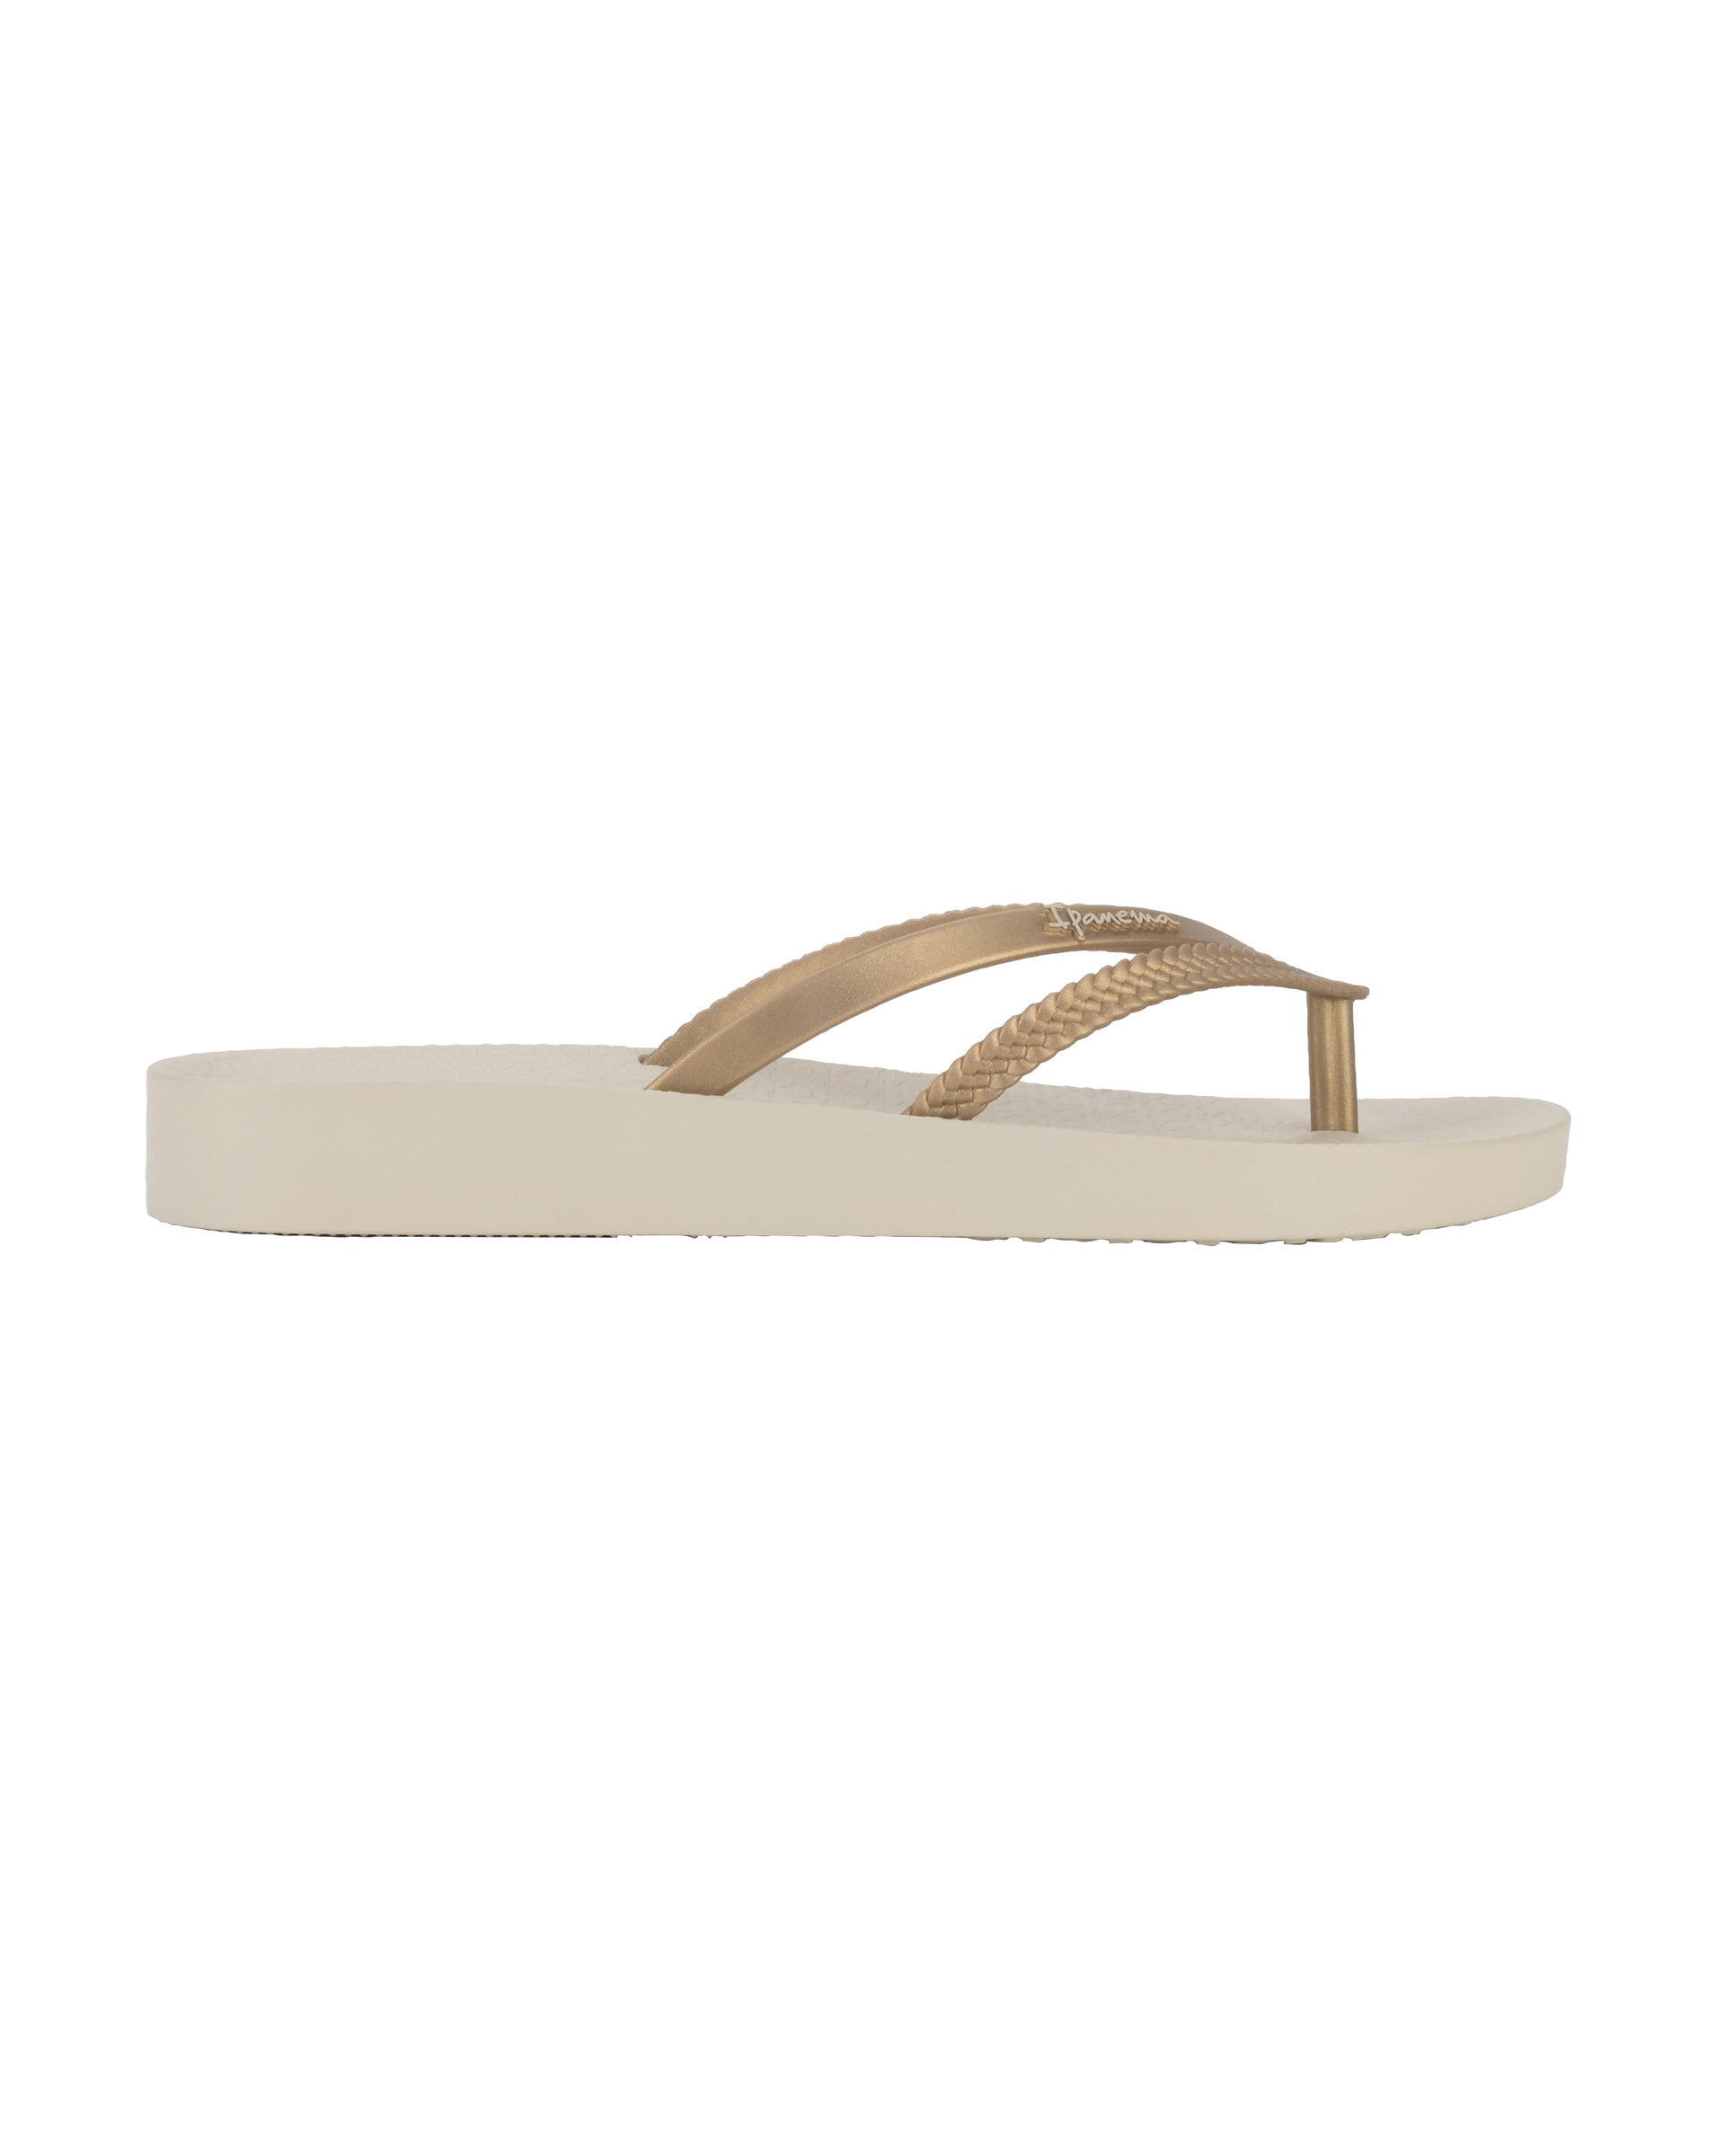 Outer side view of a beige Ipanema Bossa Soft women's flip flop with gold straps.